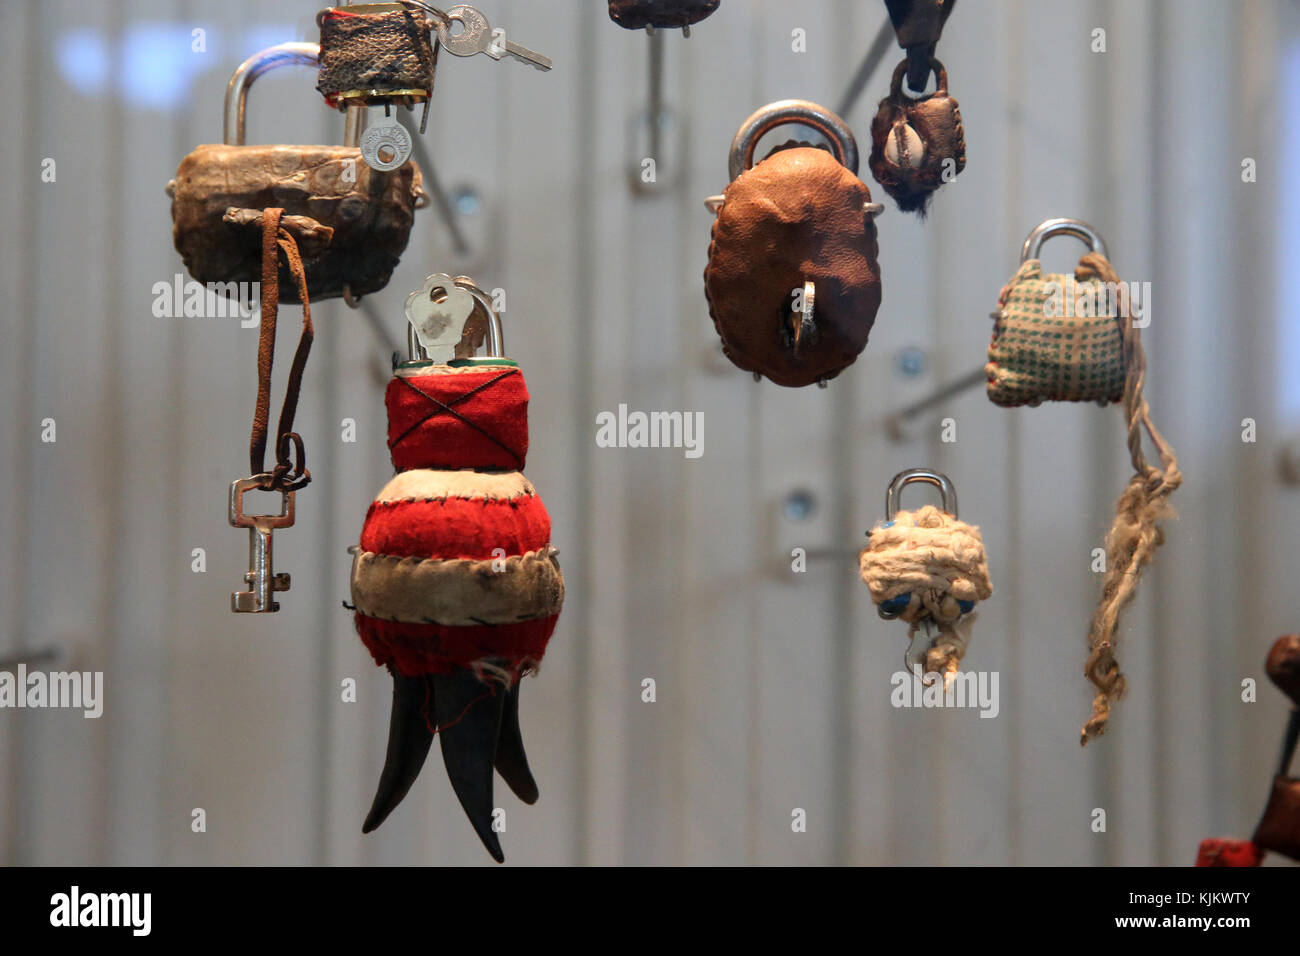 Museum of Mankind (Musee de l'Homme).  The museum is dedicated to anthropology, ethnology and prehistory of human evolution. Amulets from Senegal.  Fr Stock Photo